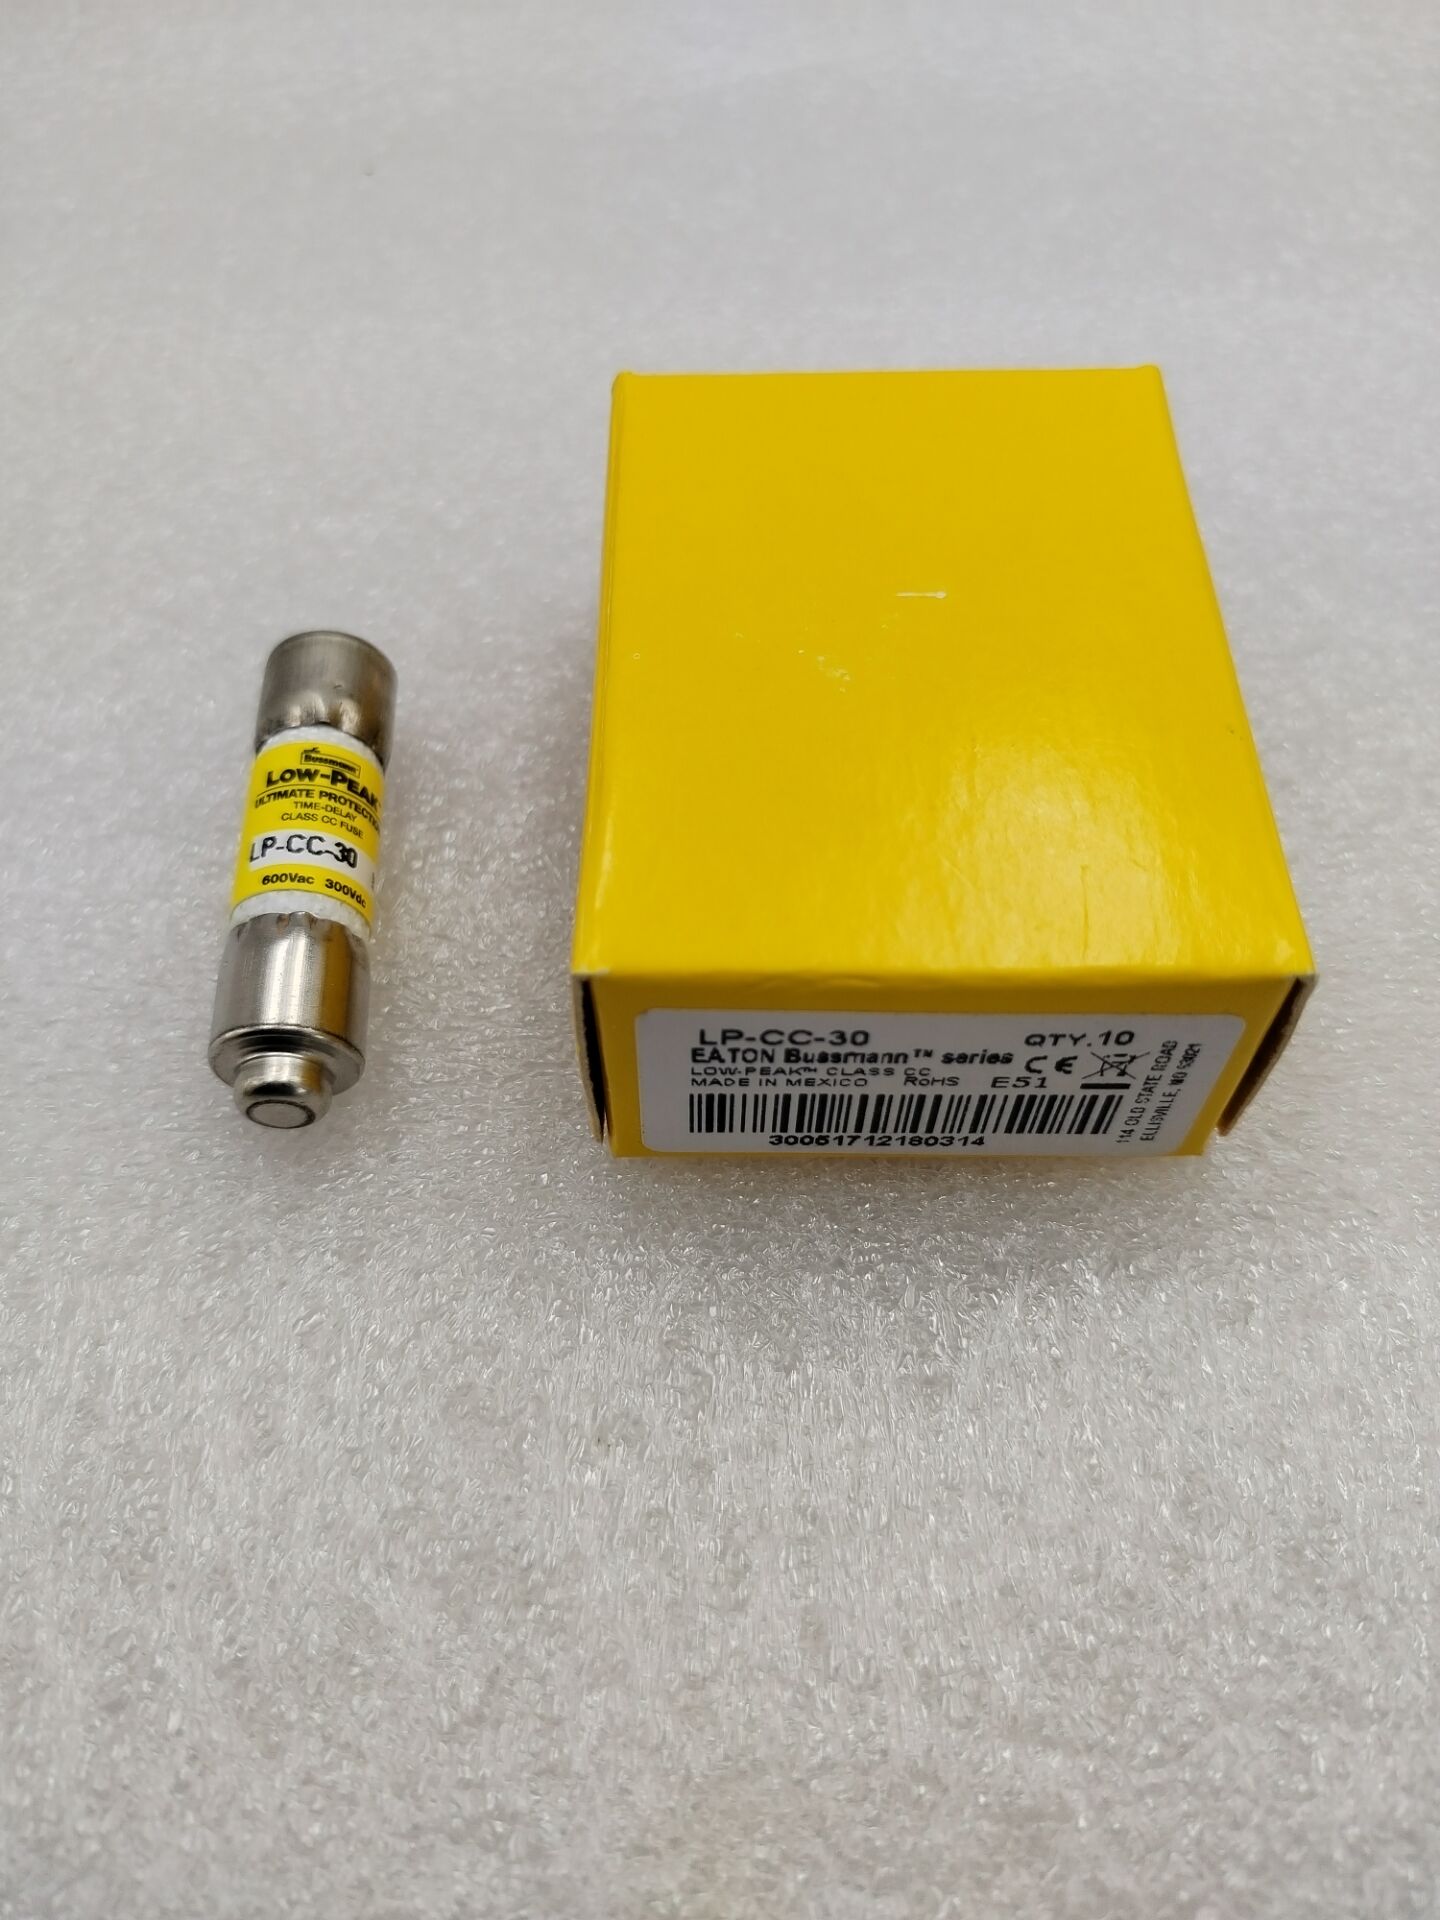 Eaton Bussmann series LP-CC fuse Current-limiting time-delay fuse Rejection style 30A Dual CC Non-in